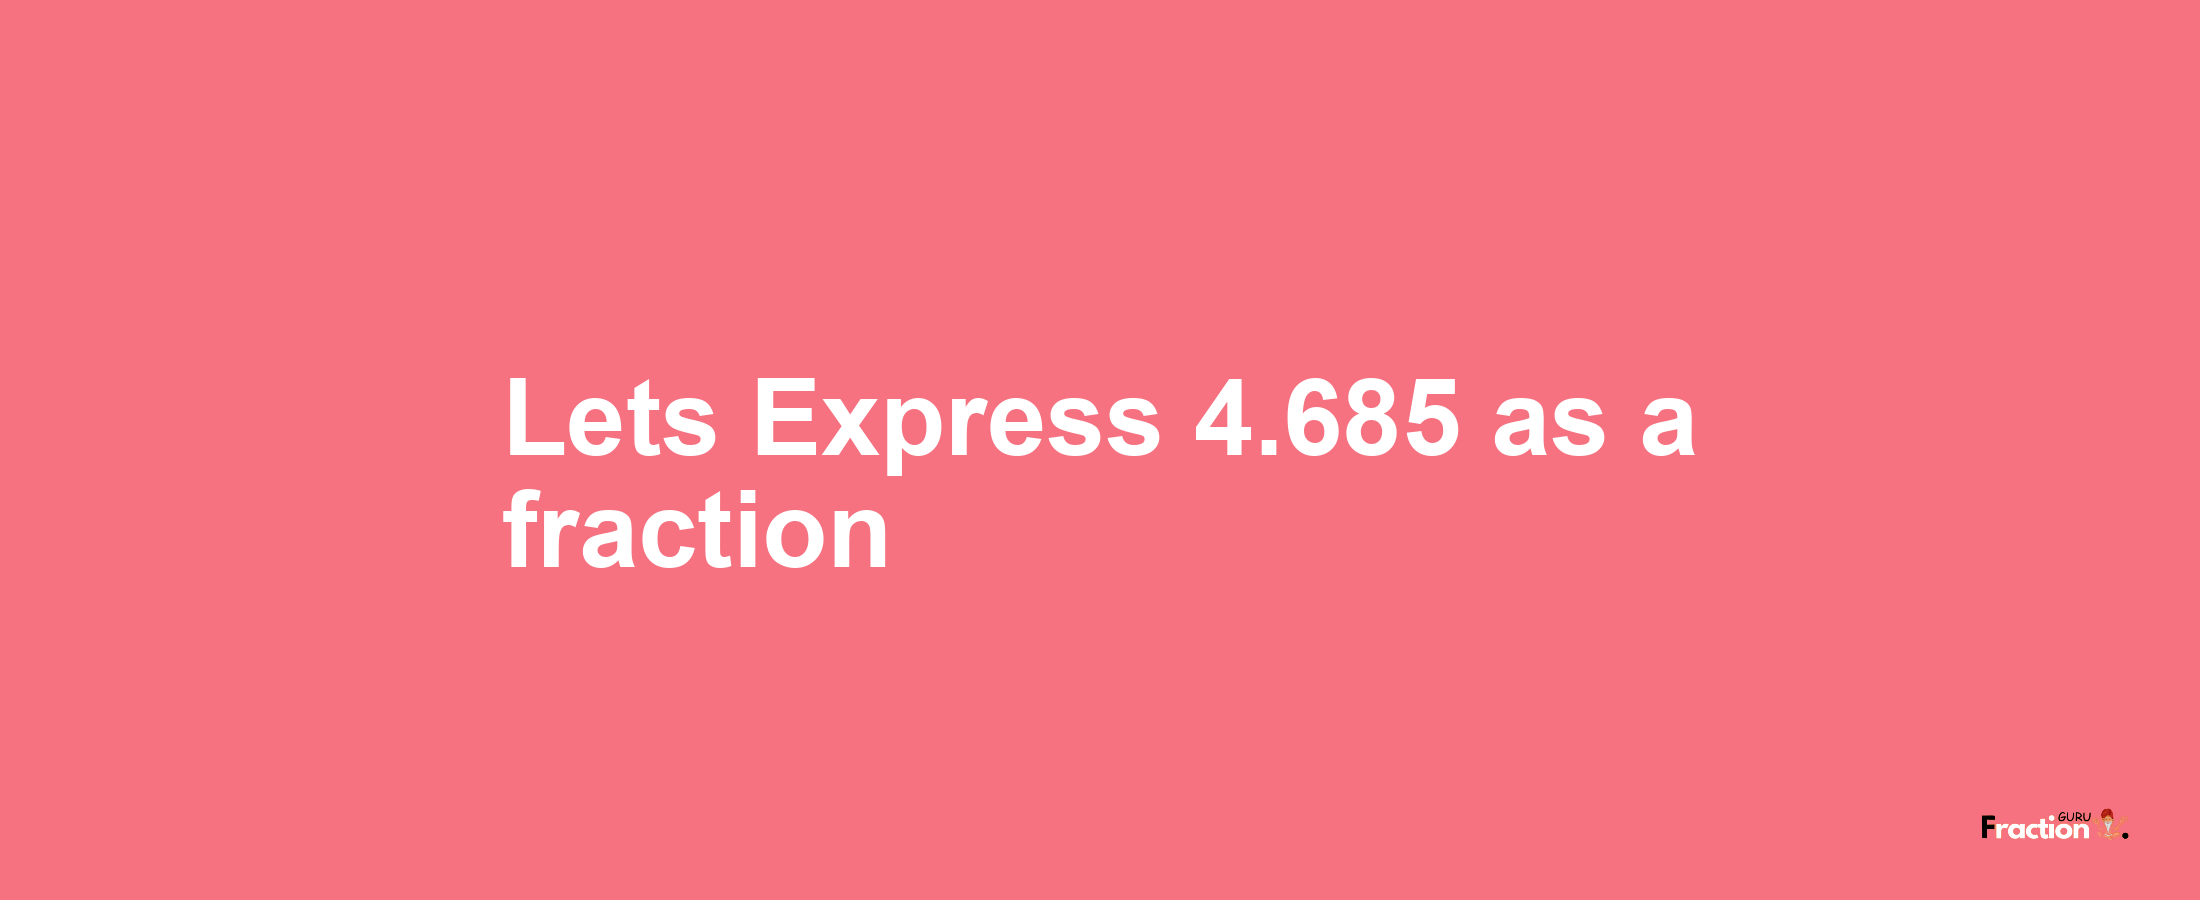 Lets Express 4.685 as afraction